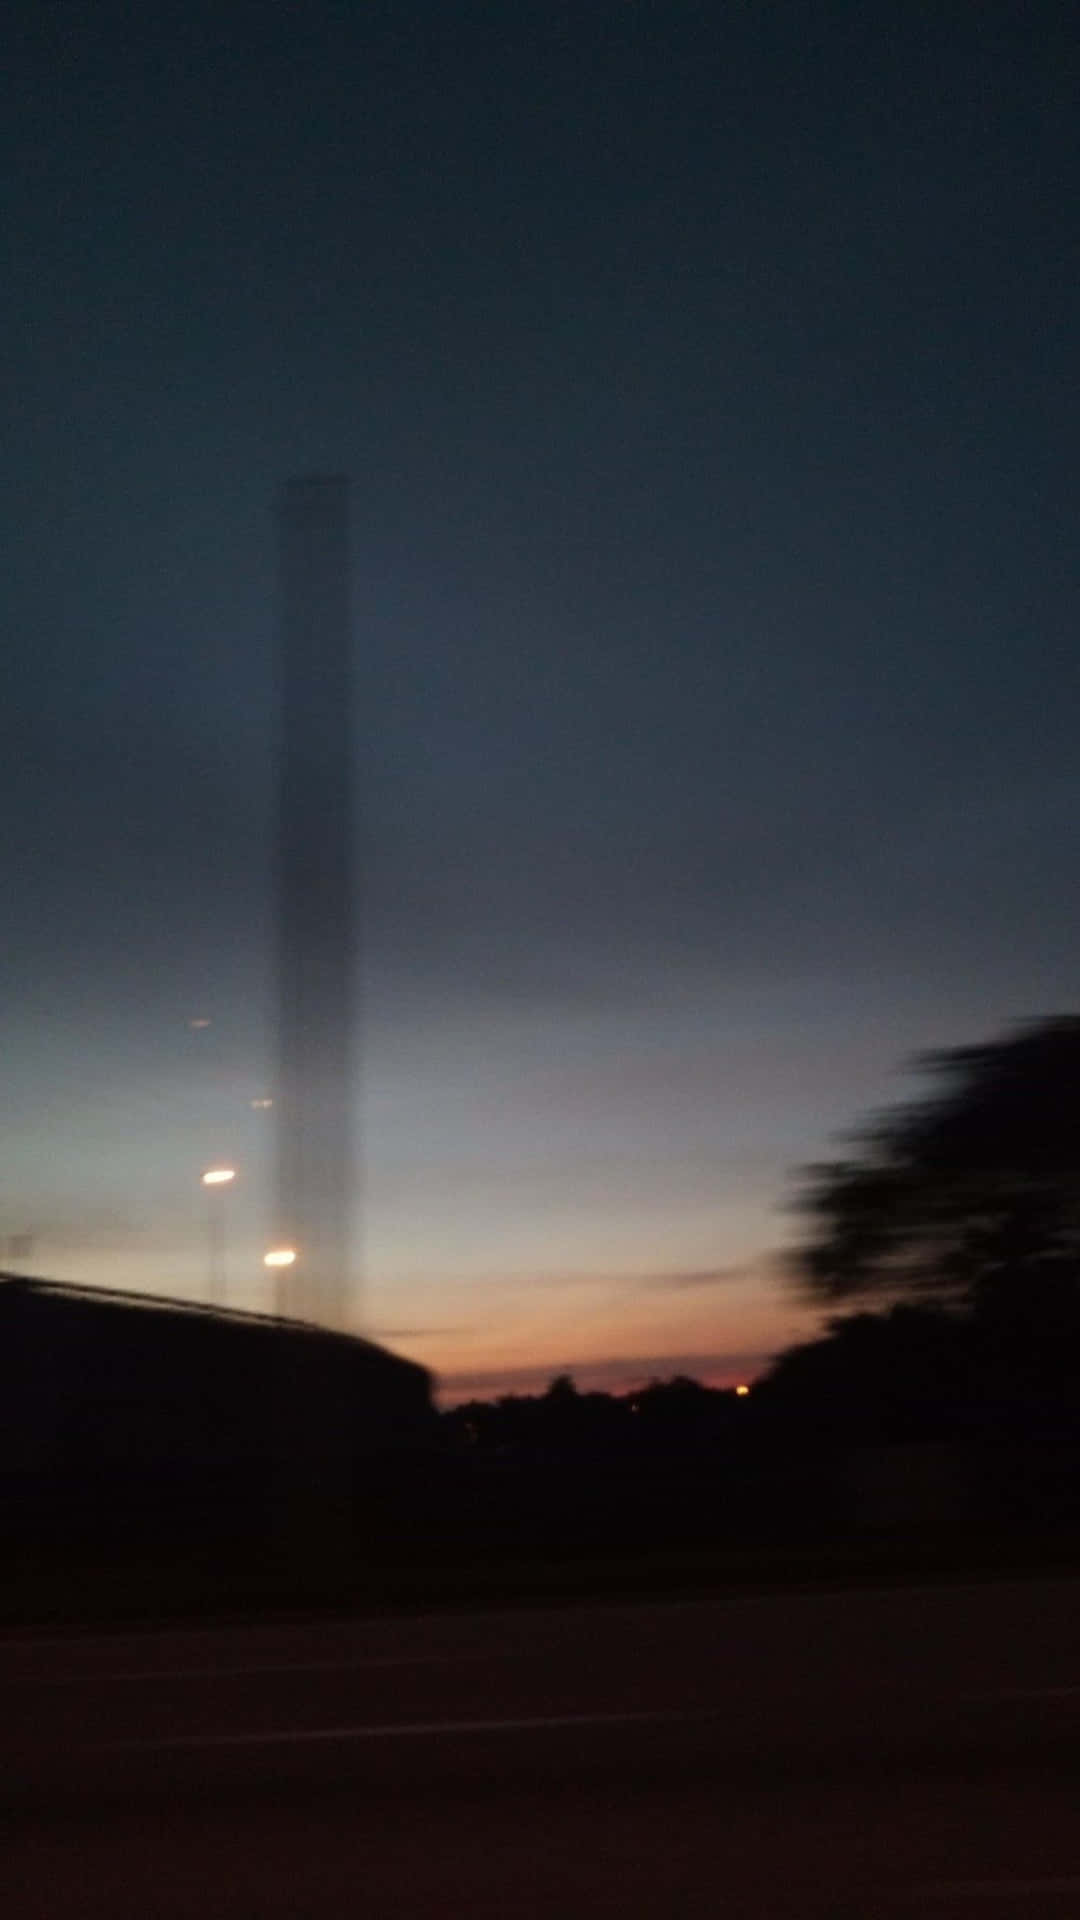 Blurry Sunset Electricity Lines Picture